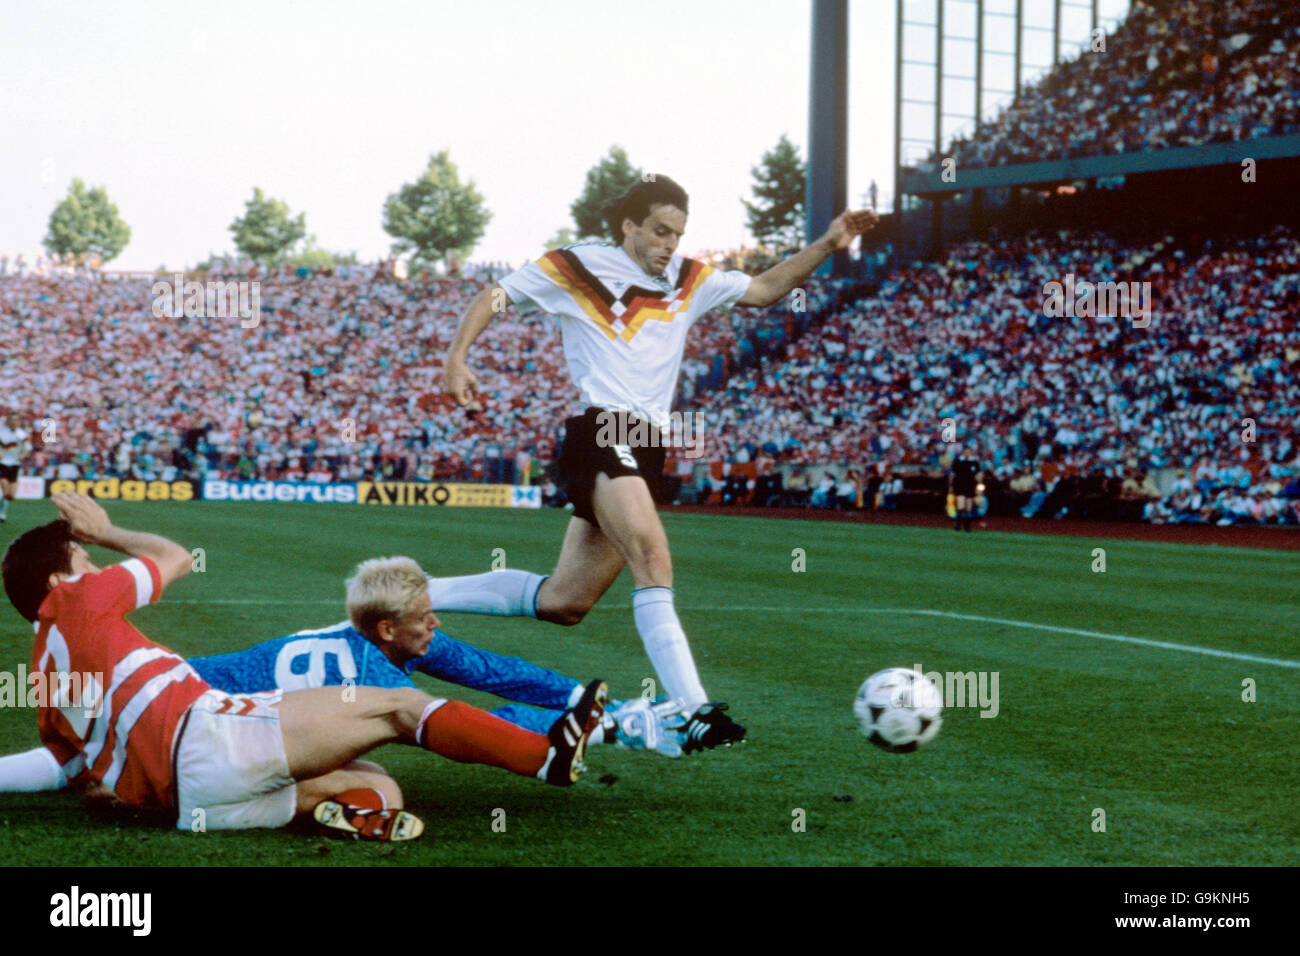 Soccer - European Championships - Group One - West Germany v Denmark - Parkstadion. West Germany's Matthias Herget (r) reaches the ball ahead of Denmark's John Sivebaek (l) and Peter Schmeichel (c) Stock Photo